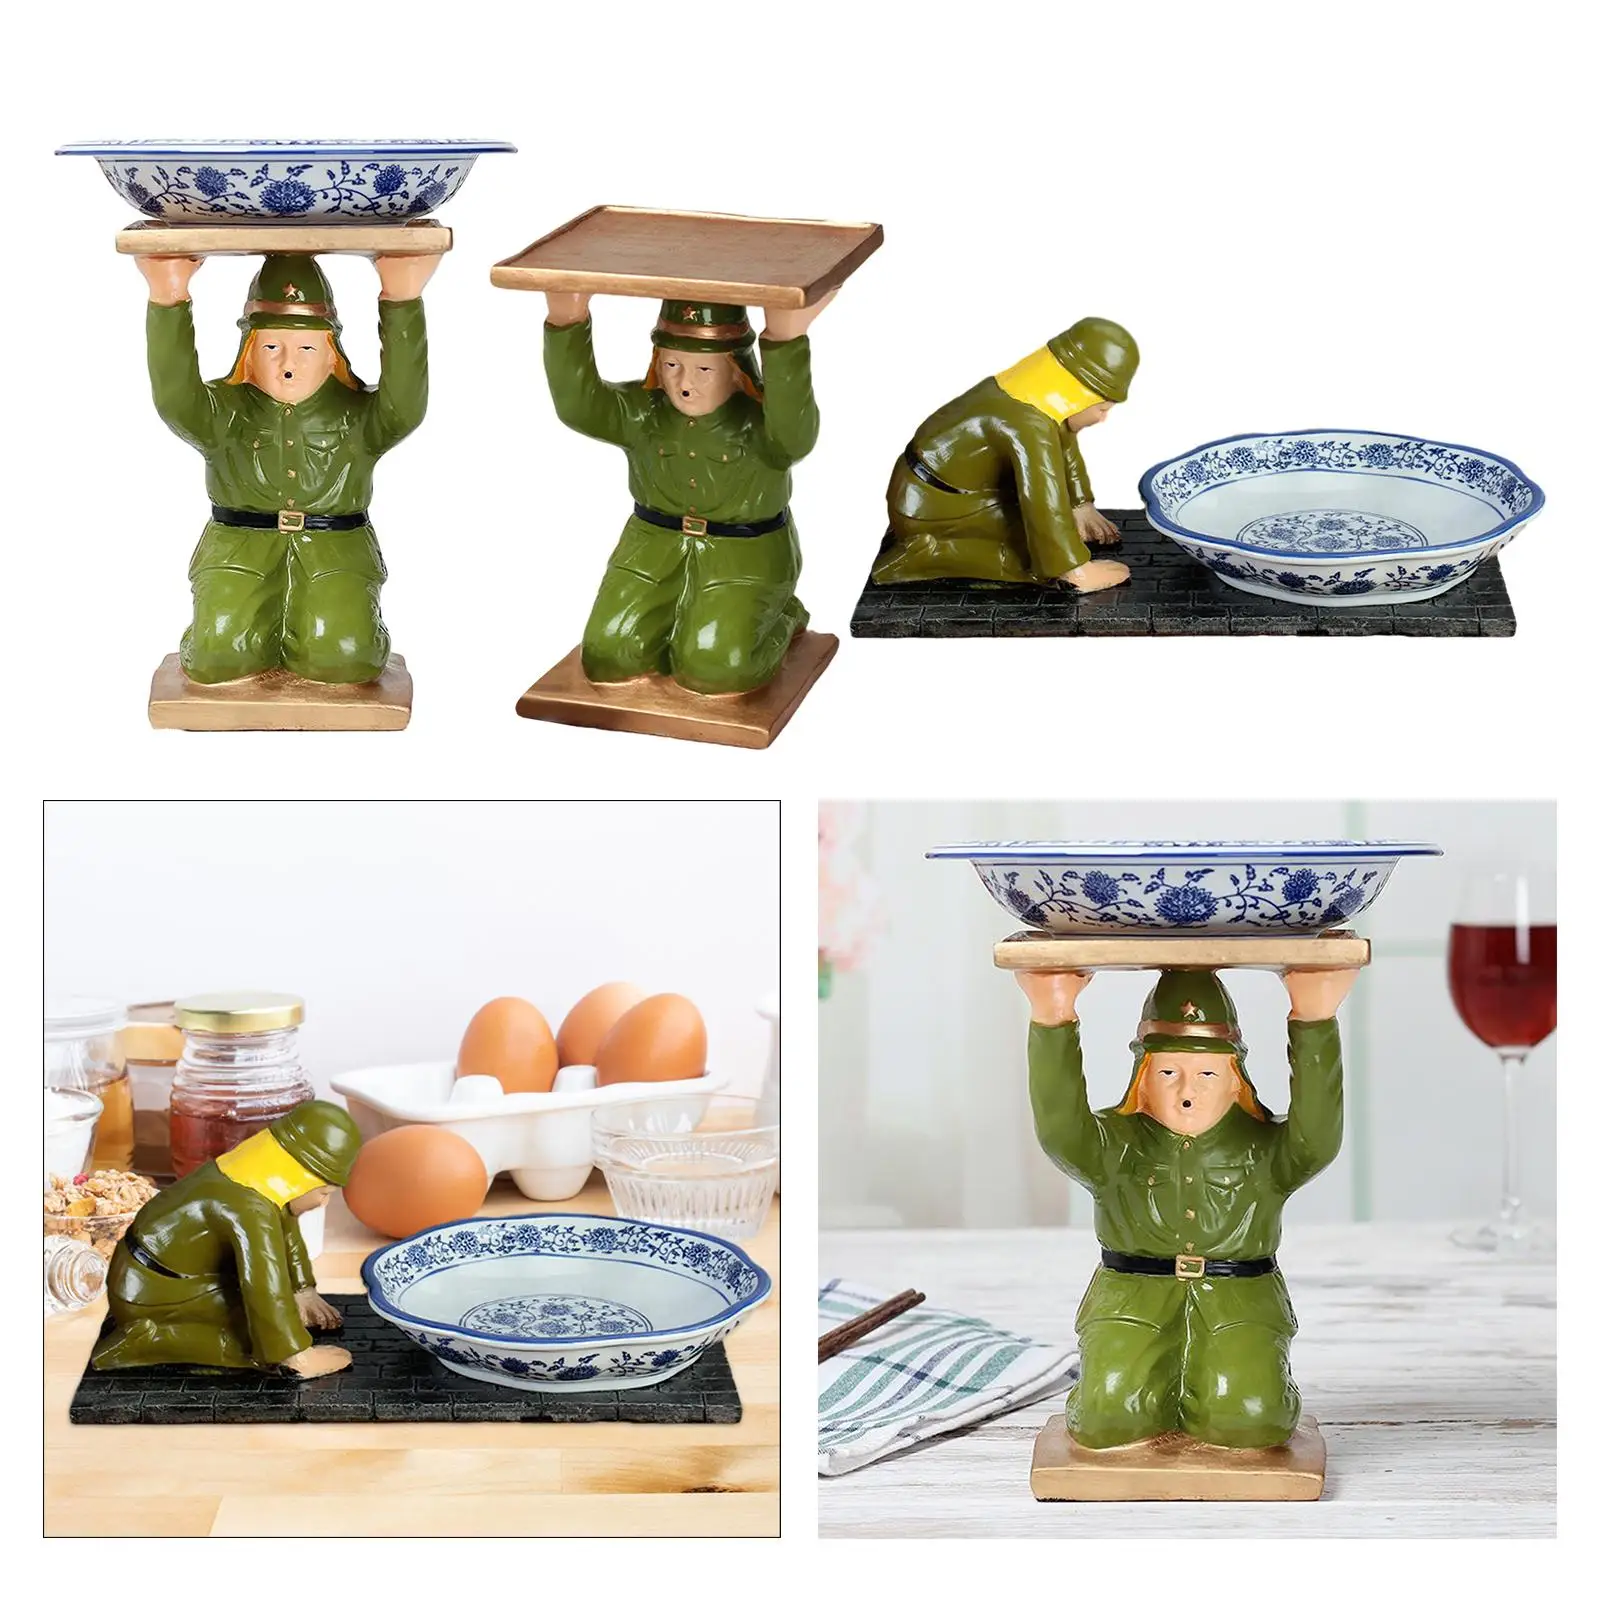 Serving Tray with Figurine Dinner Plate Restaurant Serving Tableware Fruit Trays for Restaurant Dining Room Hotel Decor